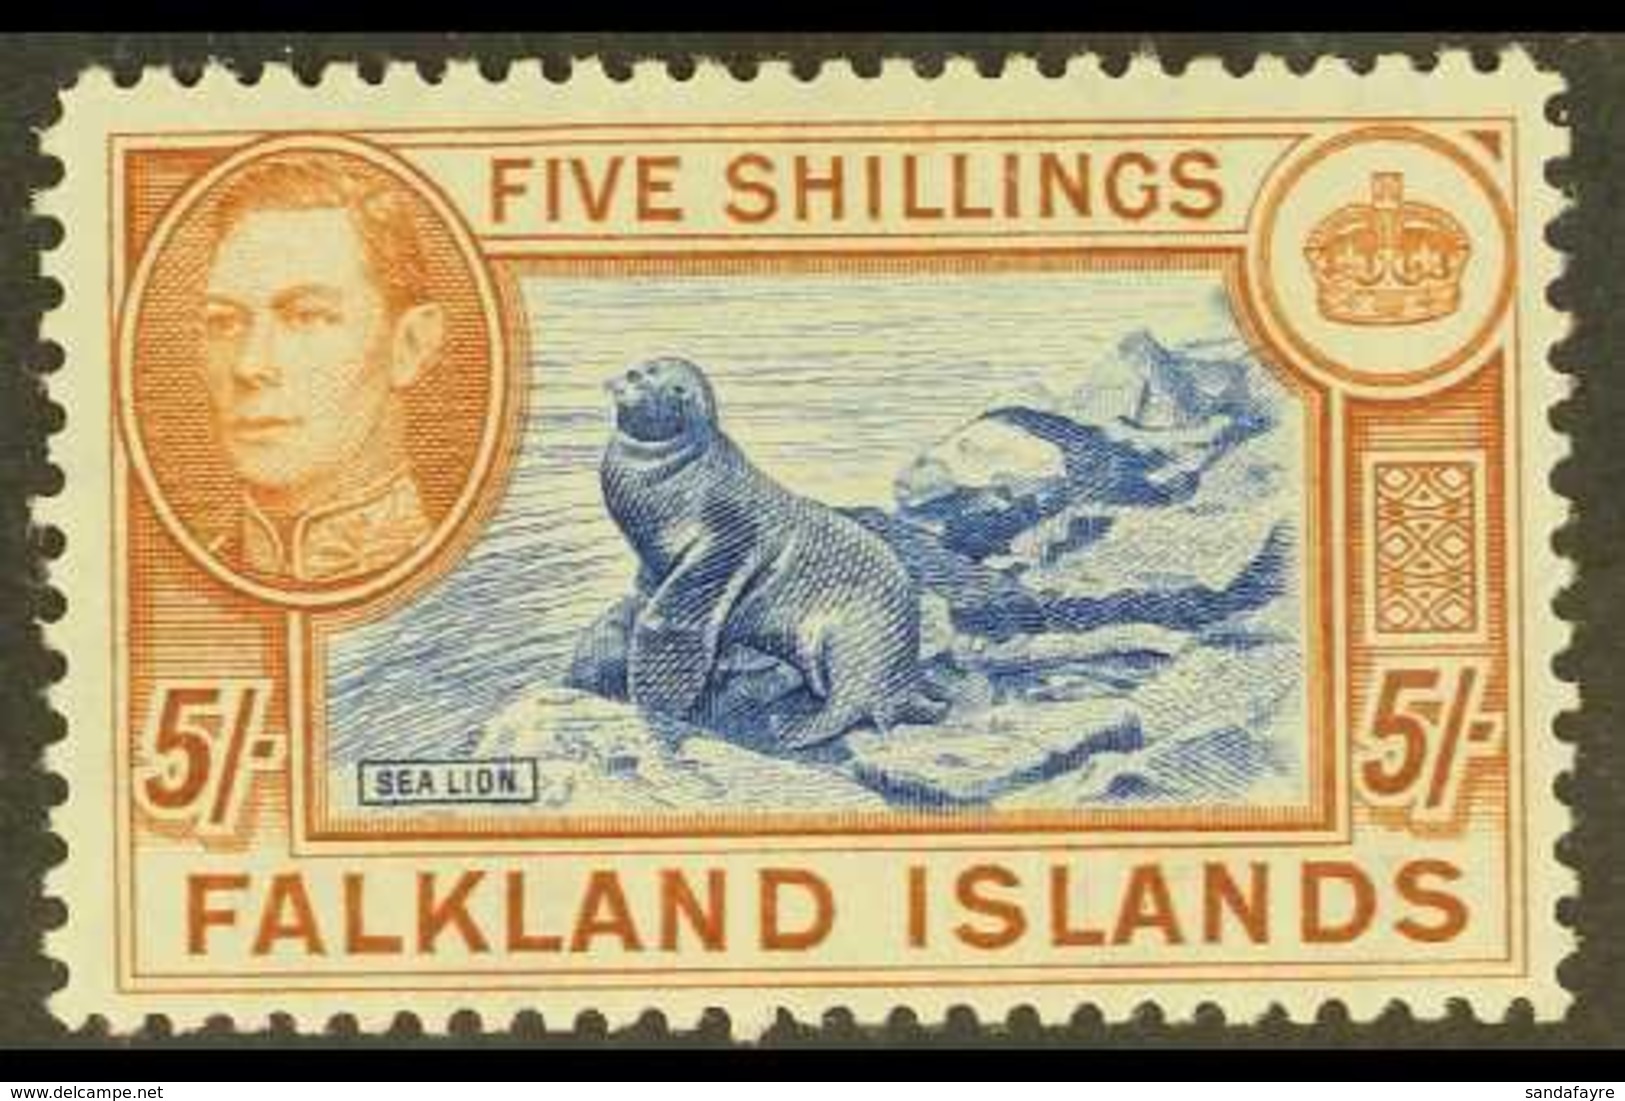 1938-50  KGVI Definitive 5s Steel Blue And Buff-brown (thin Paper), SG 161d, Never Hinged Mint. For More Images, Please  - Falklandeilanden